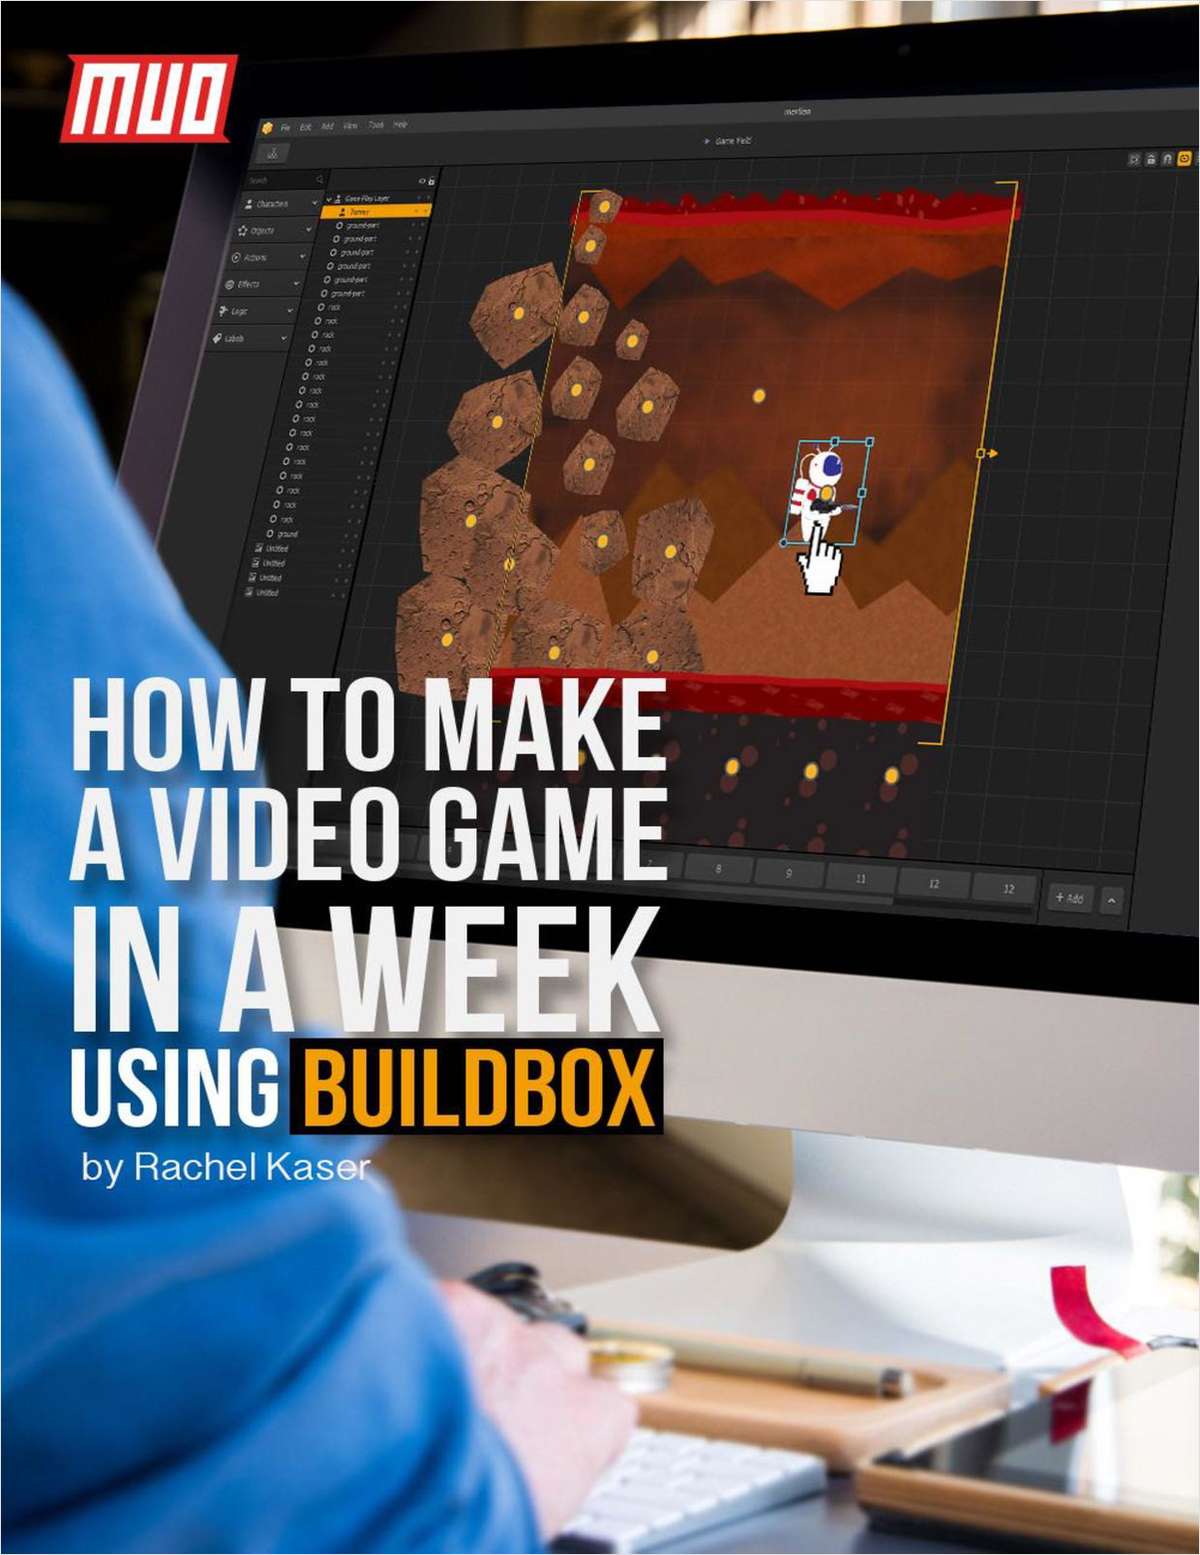 How to Make a Video Game in a Week Using Buildbox